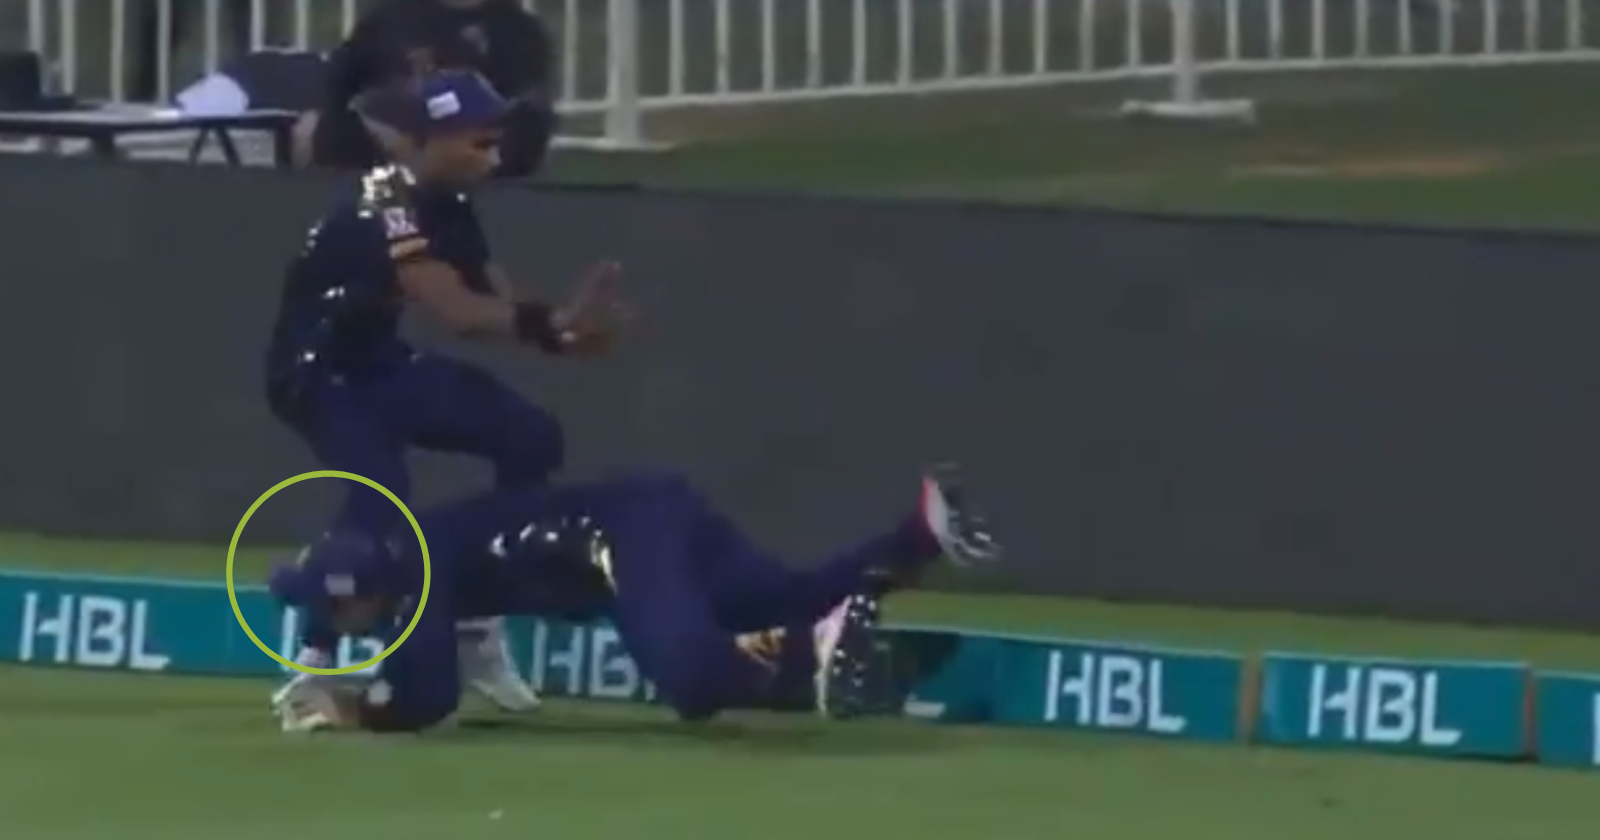 Faf du Plessis Hospitalized After Colliding With Mohammad Hasnain On The Field In PSL 2021